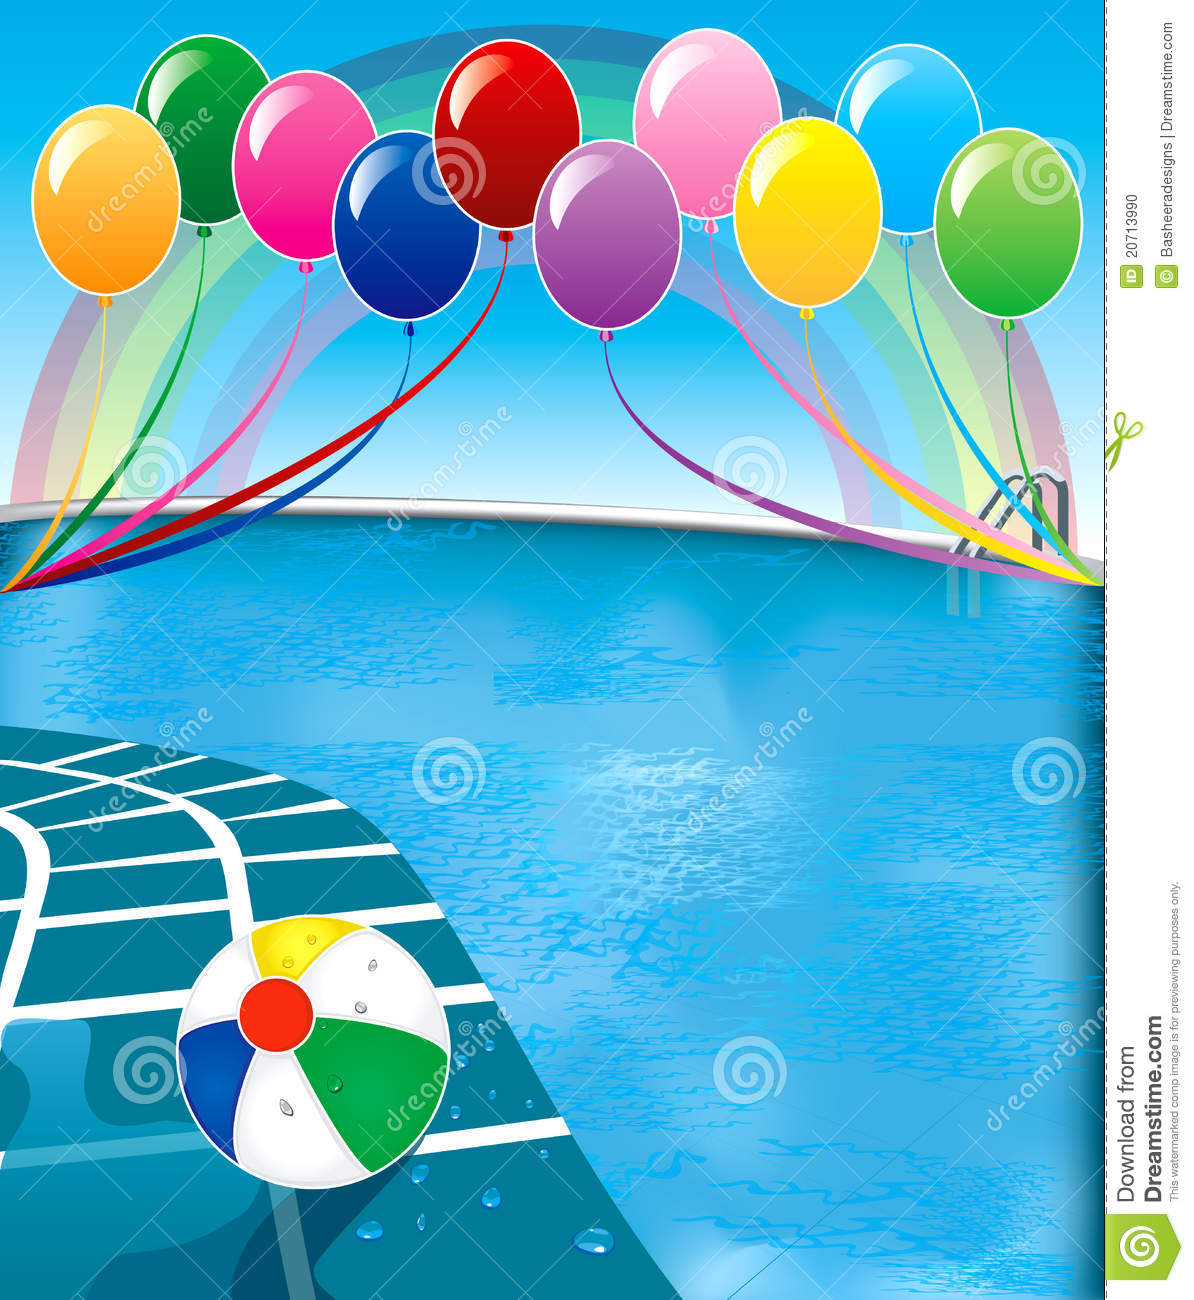 Vector Illustration Of Pool Party With Balloons And Beach Ball